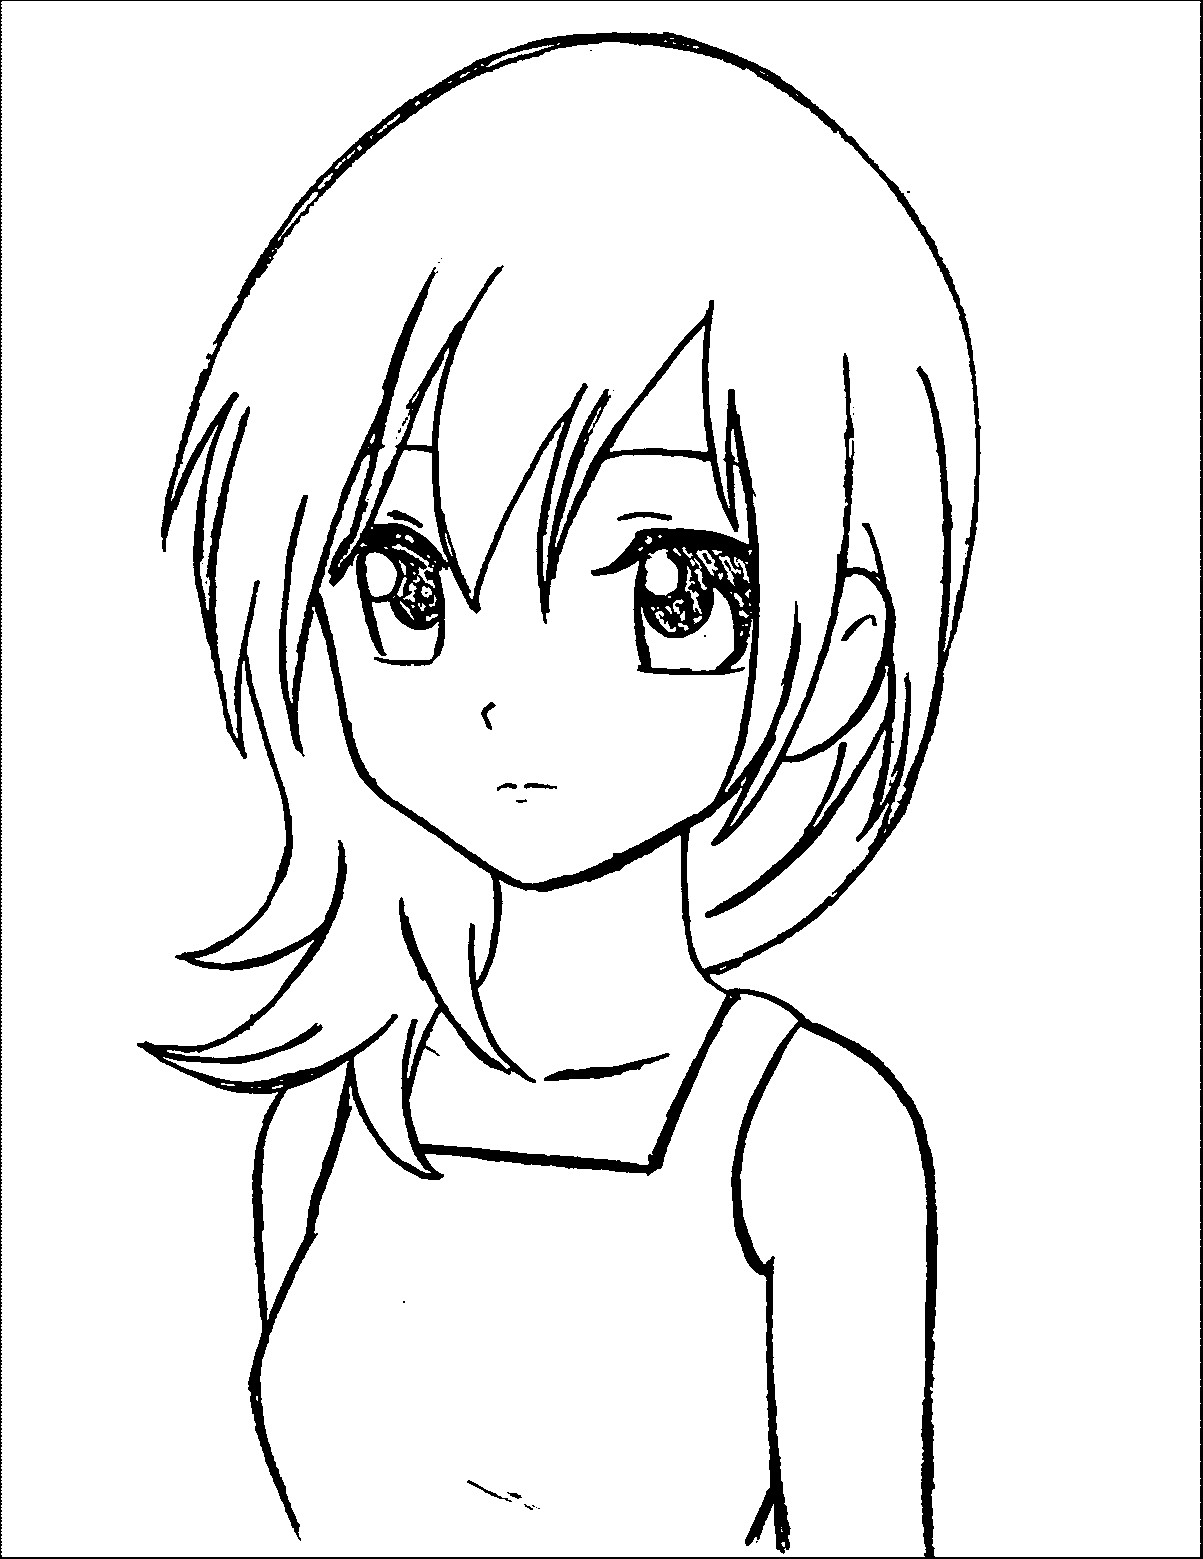 coloring pages of anime girls